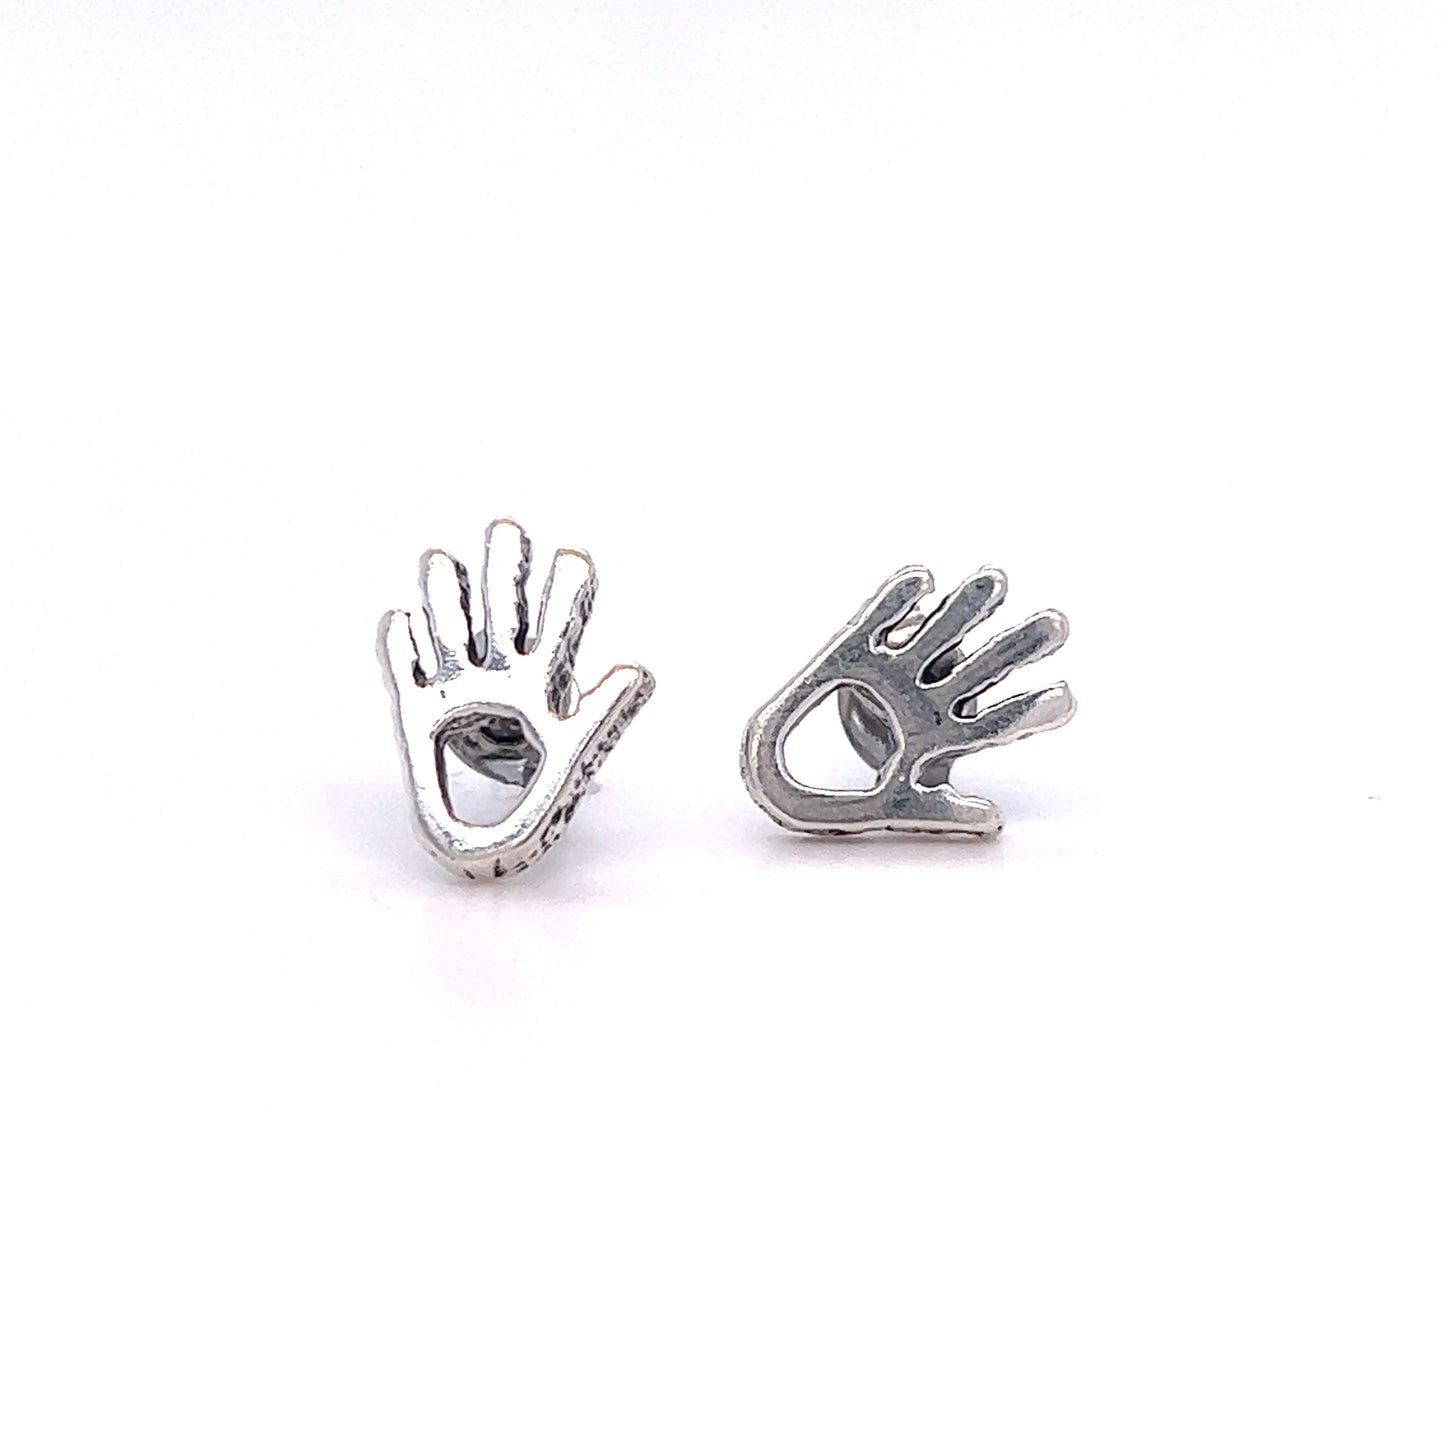 
                  
                    A pair of Super Silver Petroglyph Hand Studs, inspired by the Anasazi people and embodying the spirit of helping and healing, showcased on a white surface.
                  
                